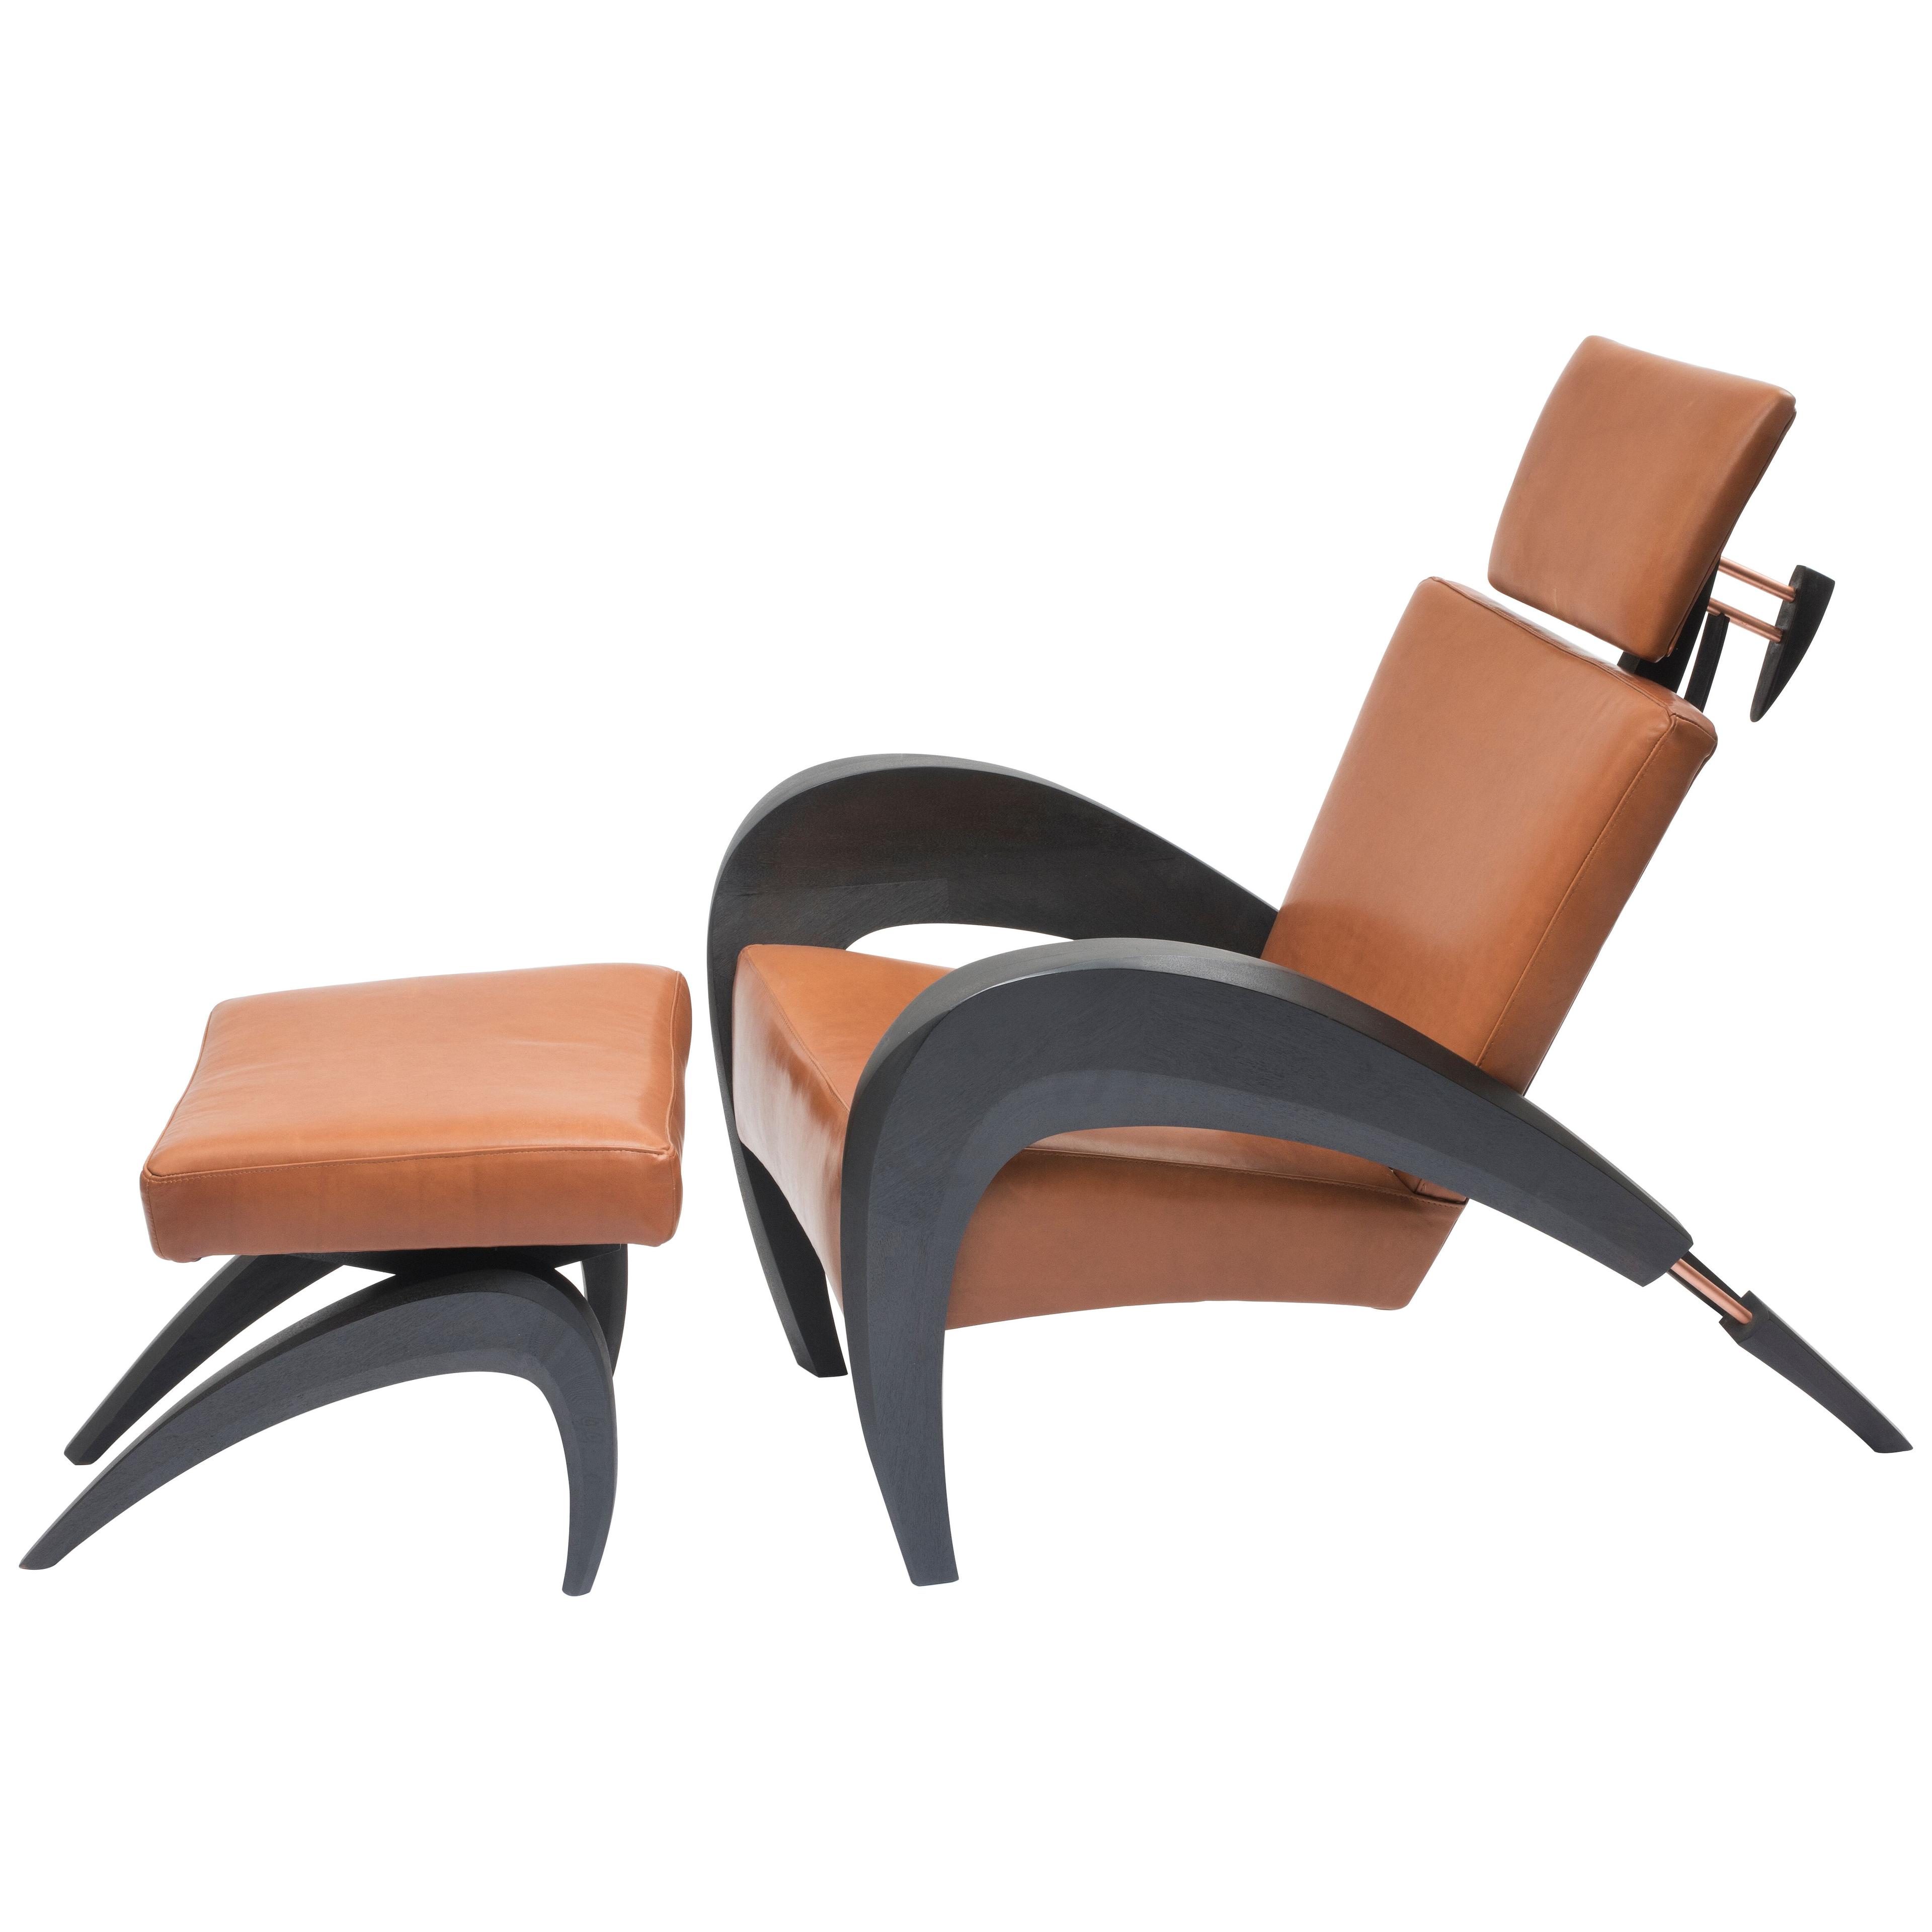 Contemporary walnut and leather armchair and ottoman, Boomerang Chair